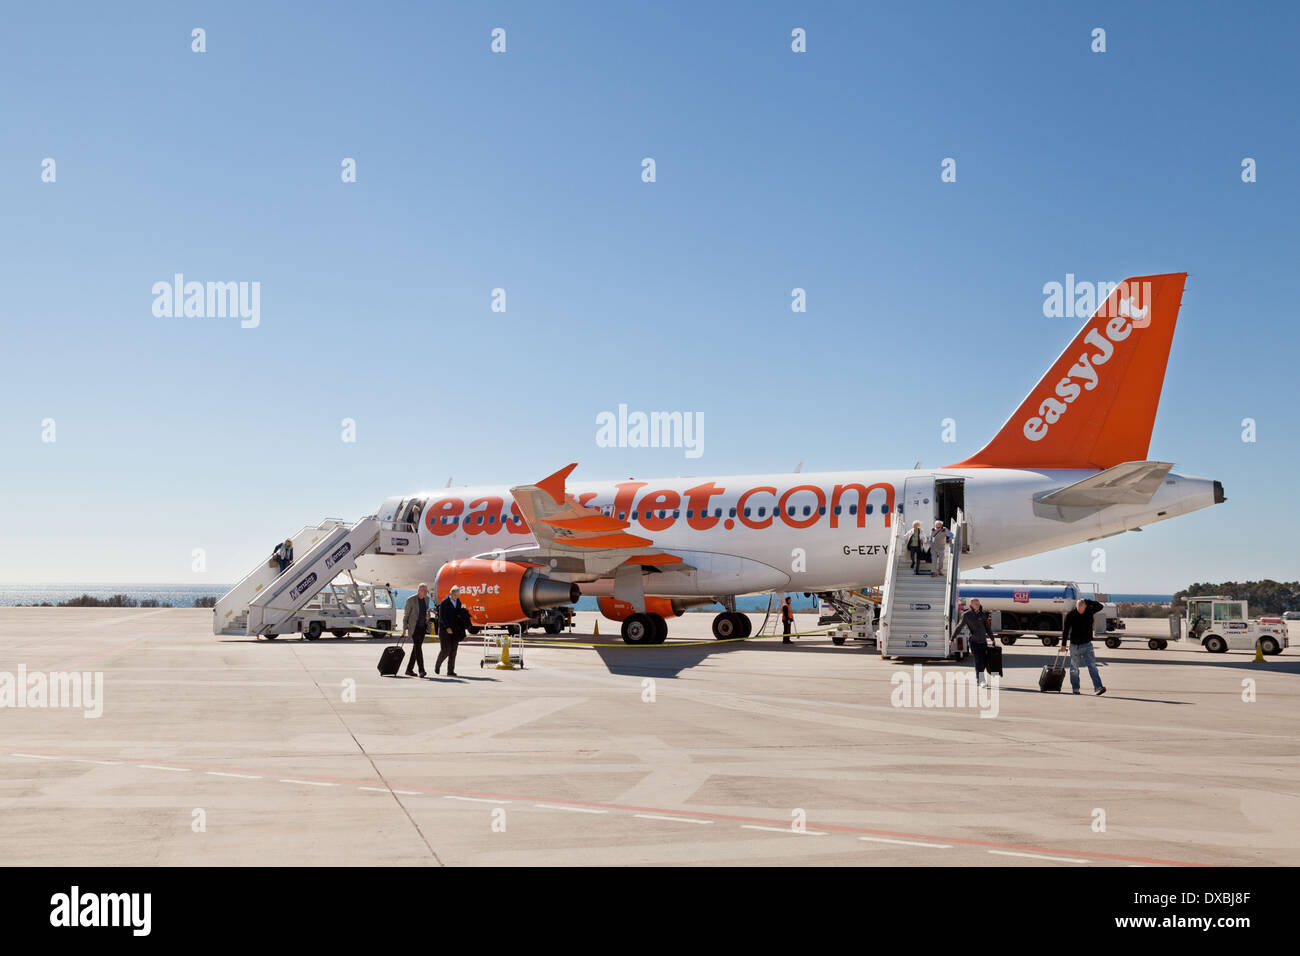 Easyjet plane on the ground at Almeria airport, Andalusia, Spain, a provincial spanish airport, Europe Stock Photo